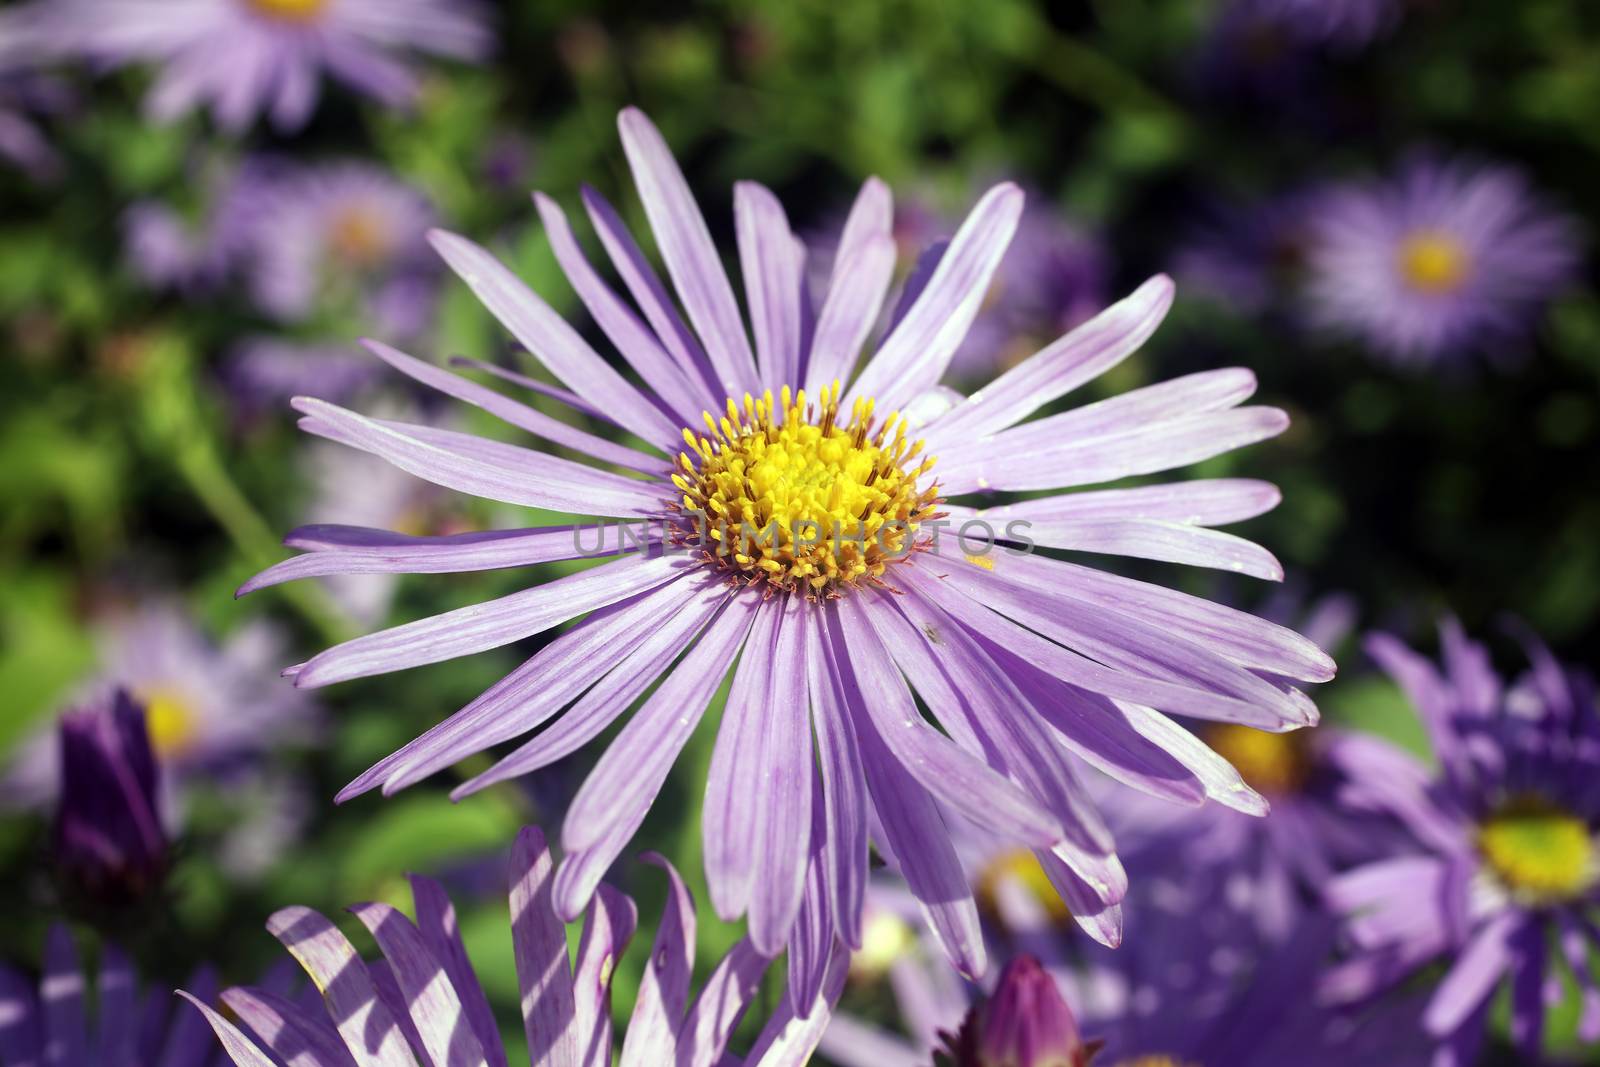 Aster x frikartii, 'Monch'  a common cultivated herbaceous perennial hardy garden flower plant also known as  Michaelmas Daisy due to its late flowering period stock photo